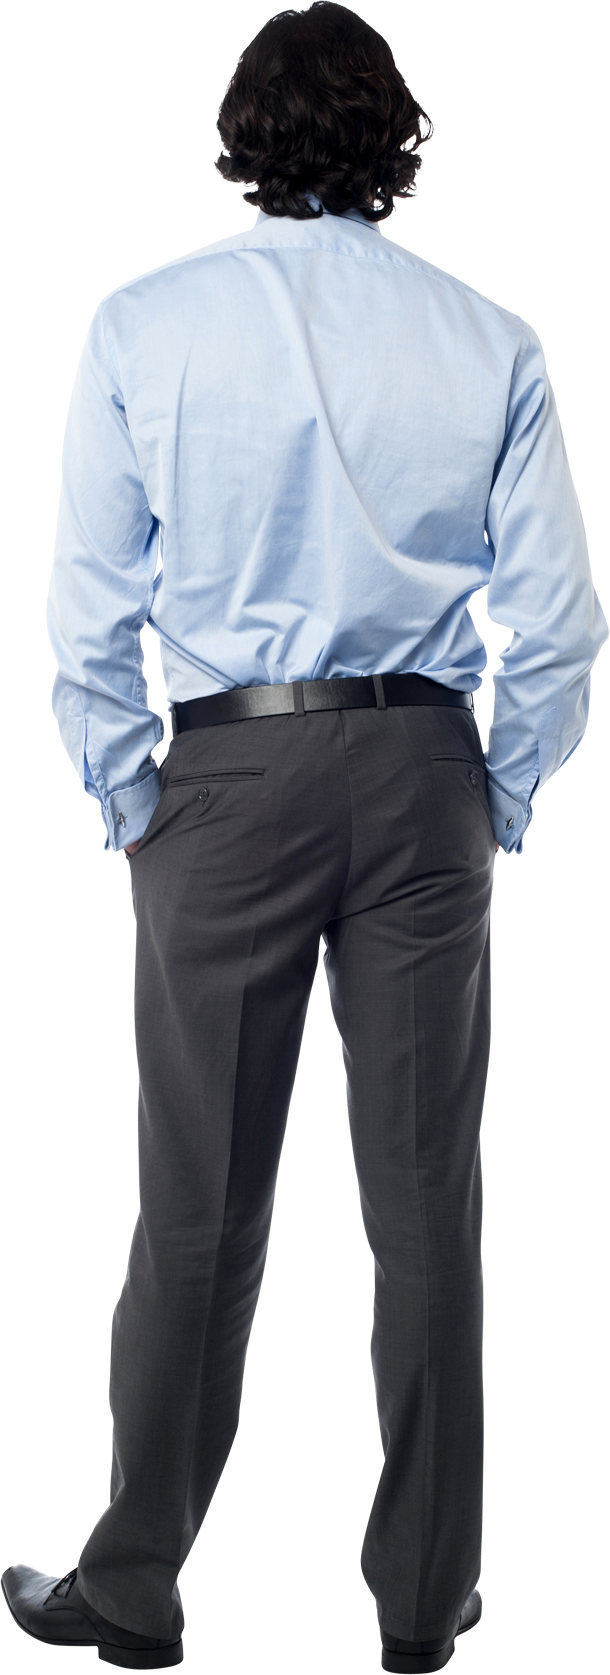 Standing Professional Business Man Free HQ Image PNG Image